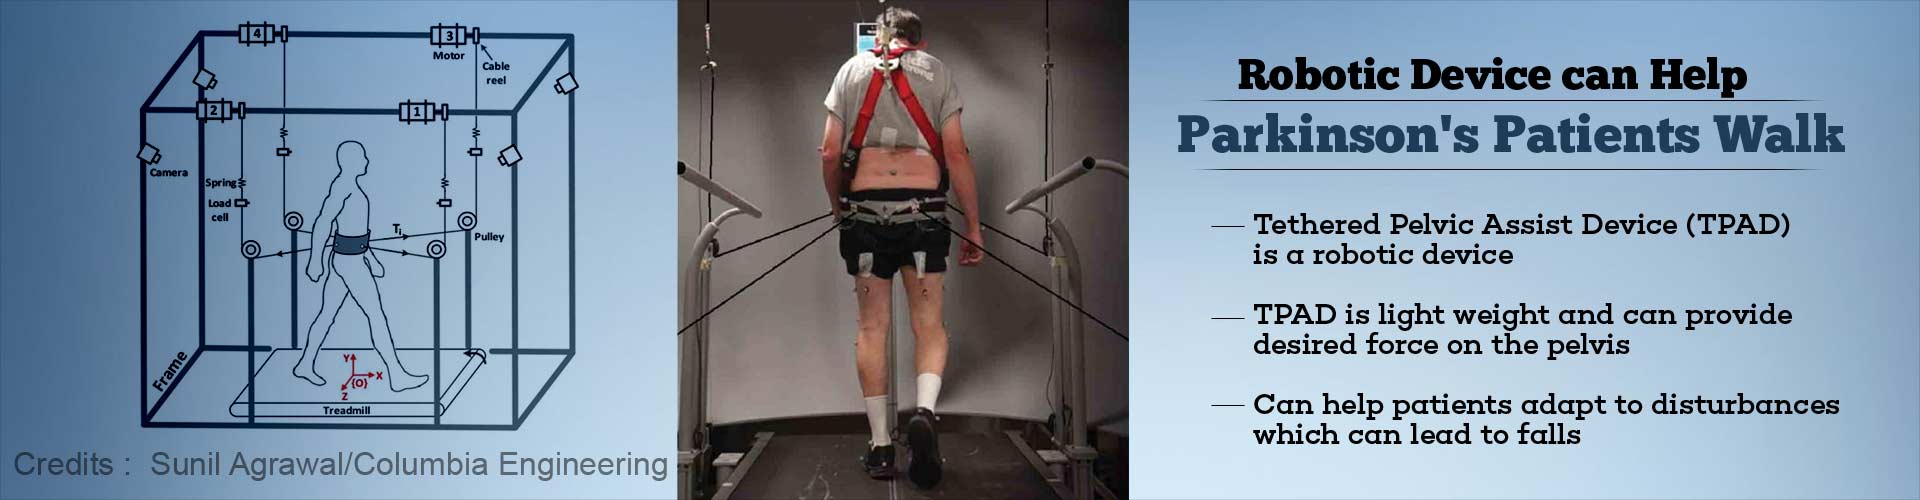 Robotic device can help parkinson's patients walk
- tethered pelvic assist device (TPAD) is a robotic device
- TPAD is light weight and can provide desired force on the pelvis
- can help patients adapt to disturbances which can lead to falls